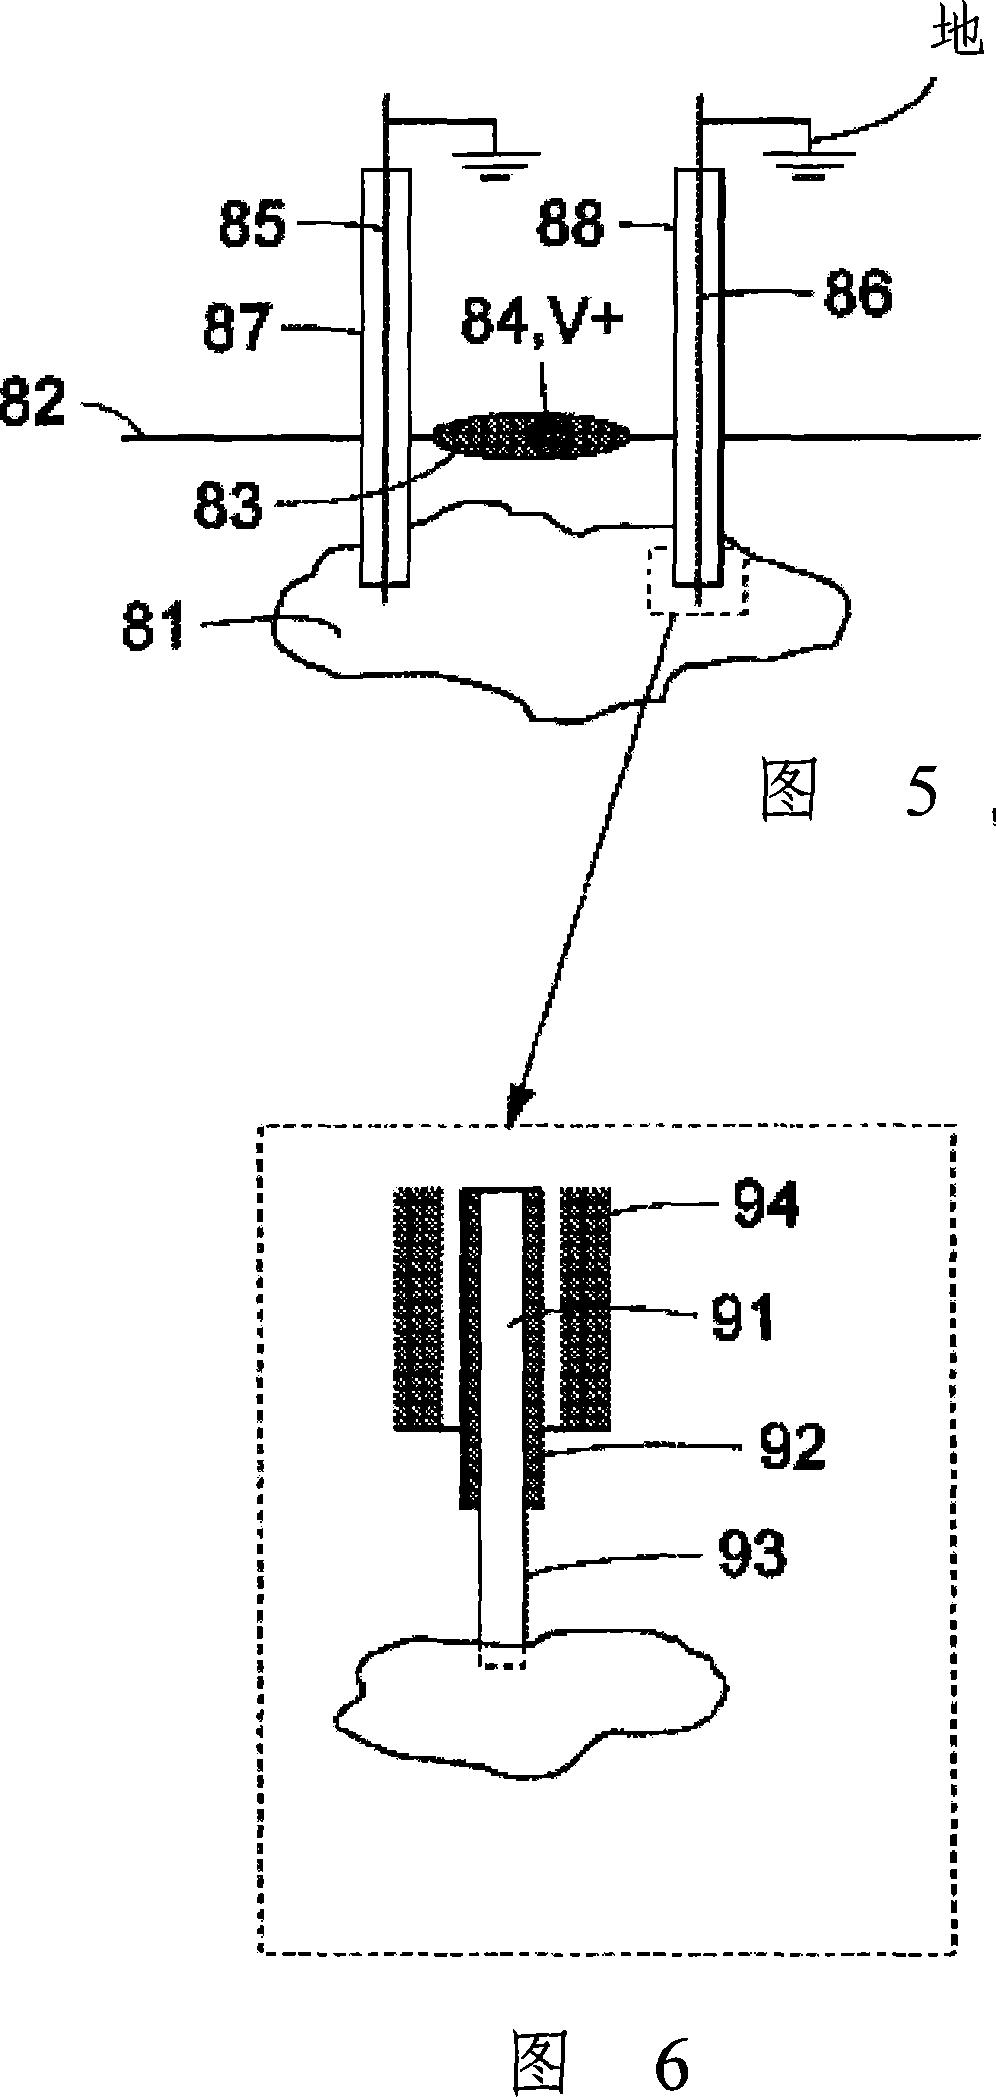 Light coupling adapter device for photodynamic or photothermal therapy or photodynamic diagnosis, corresponding system and method